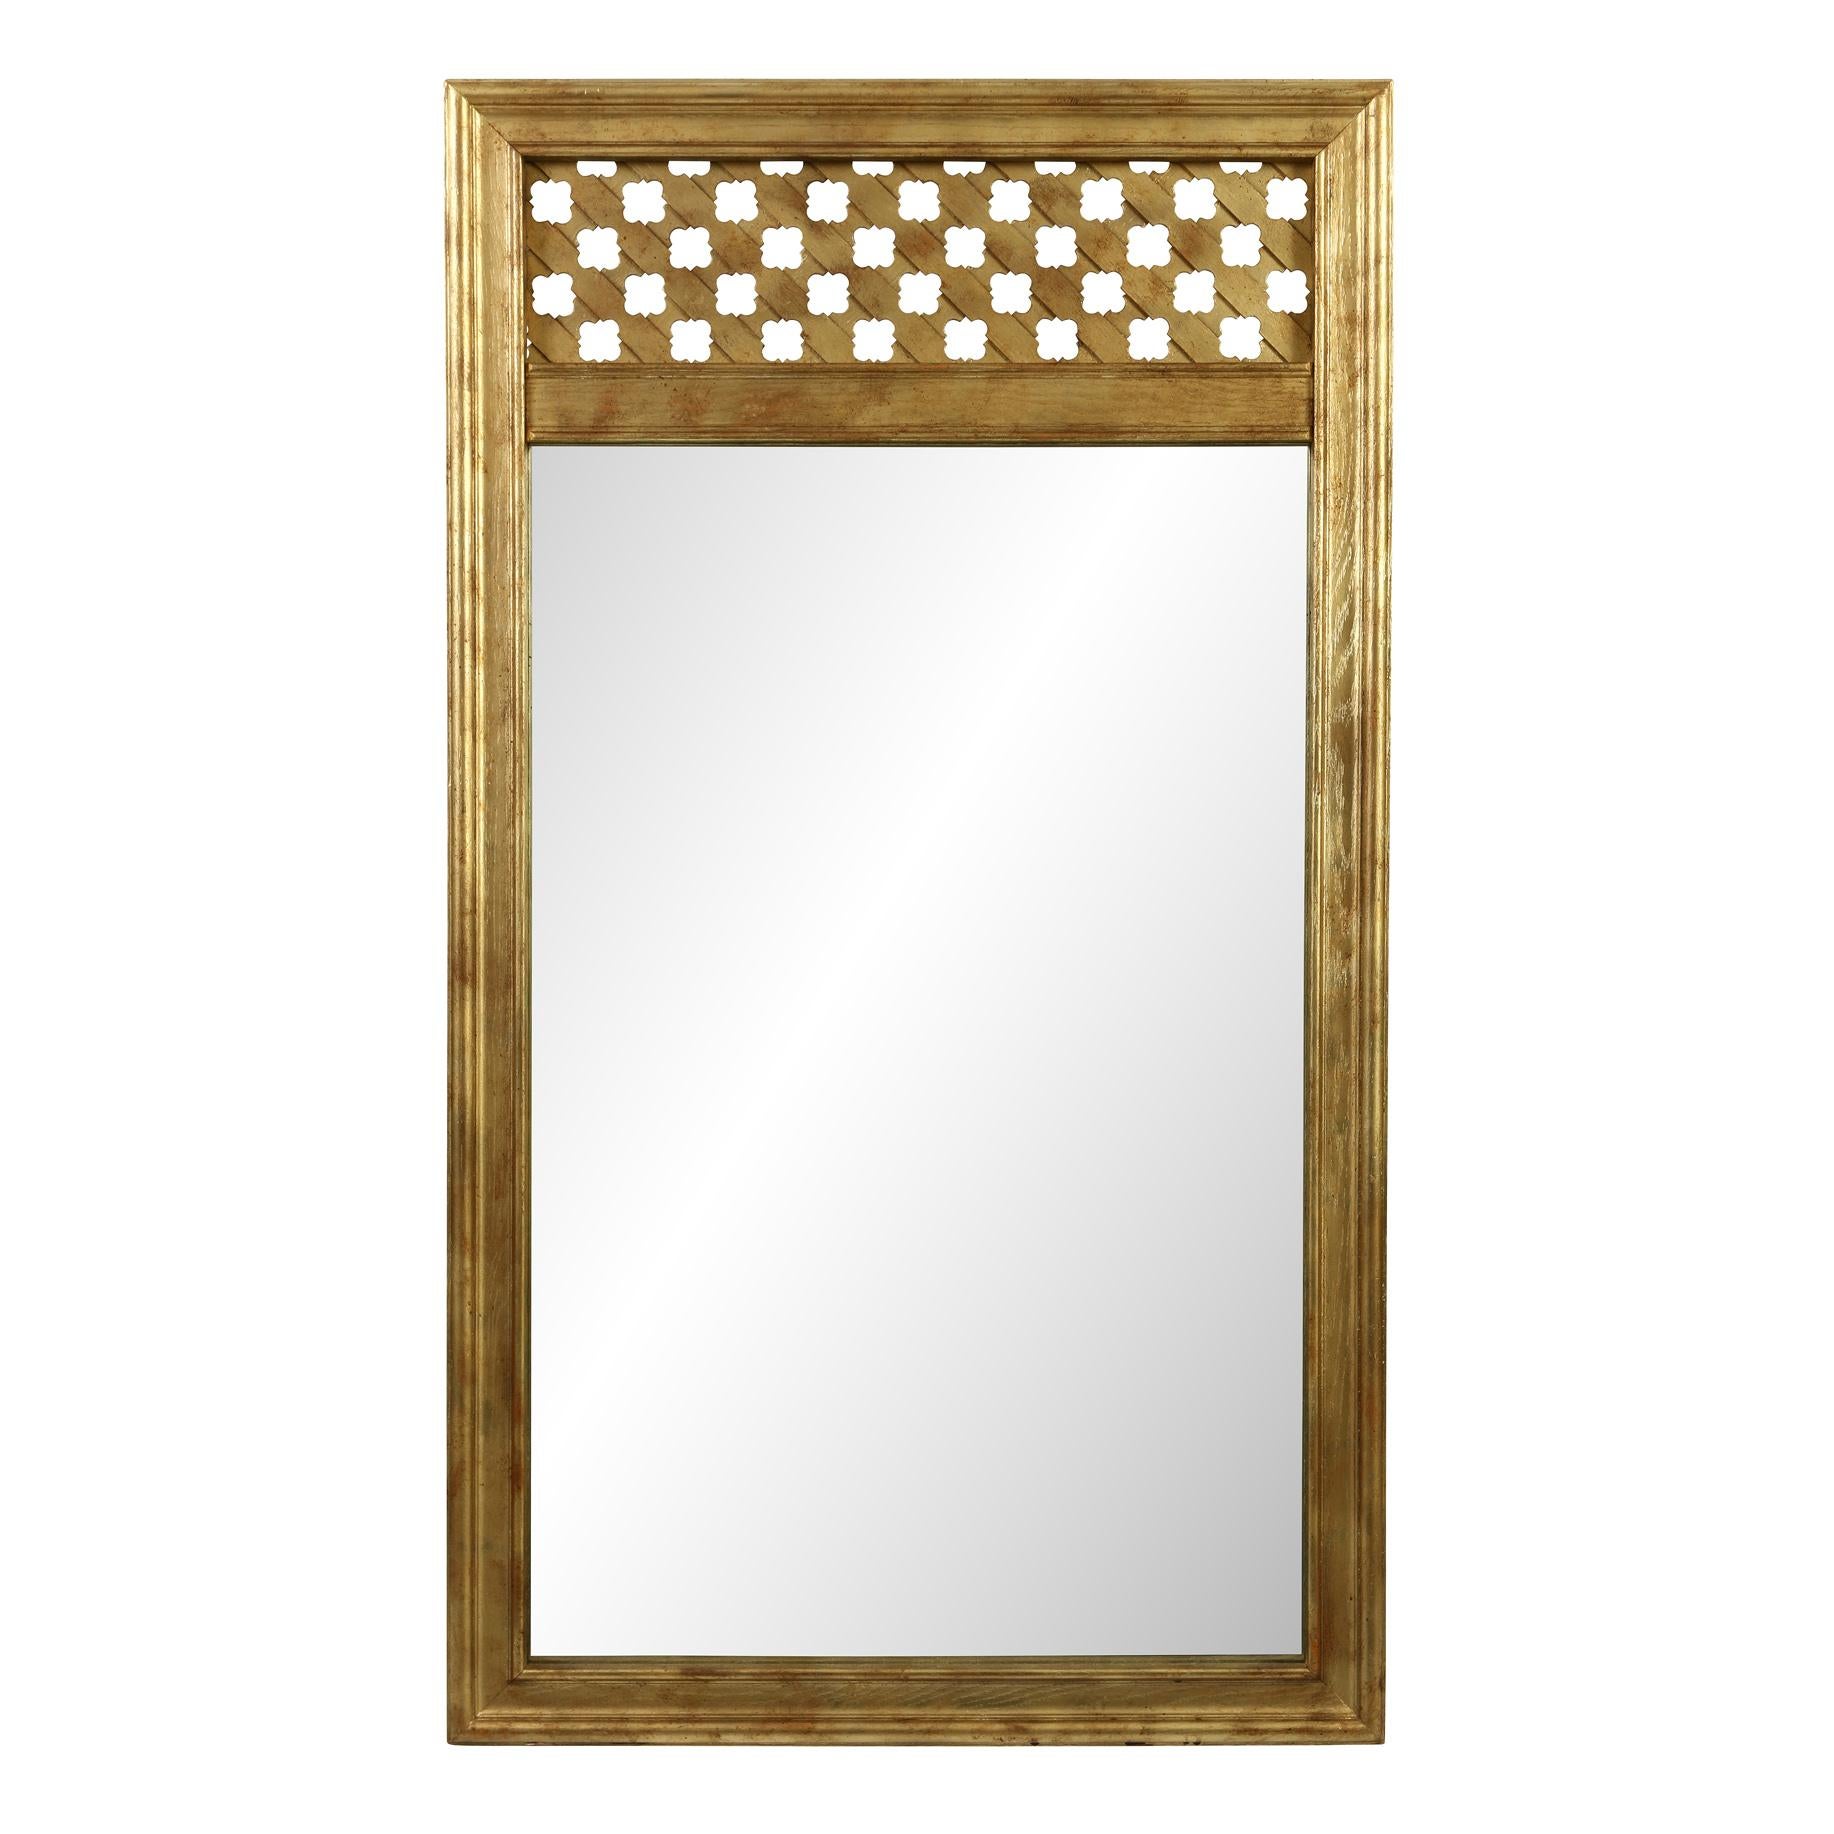 We love the clean lines of thee unique mirrors.  They are framed in a molded giltwood frame, and the top section features a reticulated design, giving this pair a lovely, yet understated elegance. 